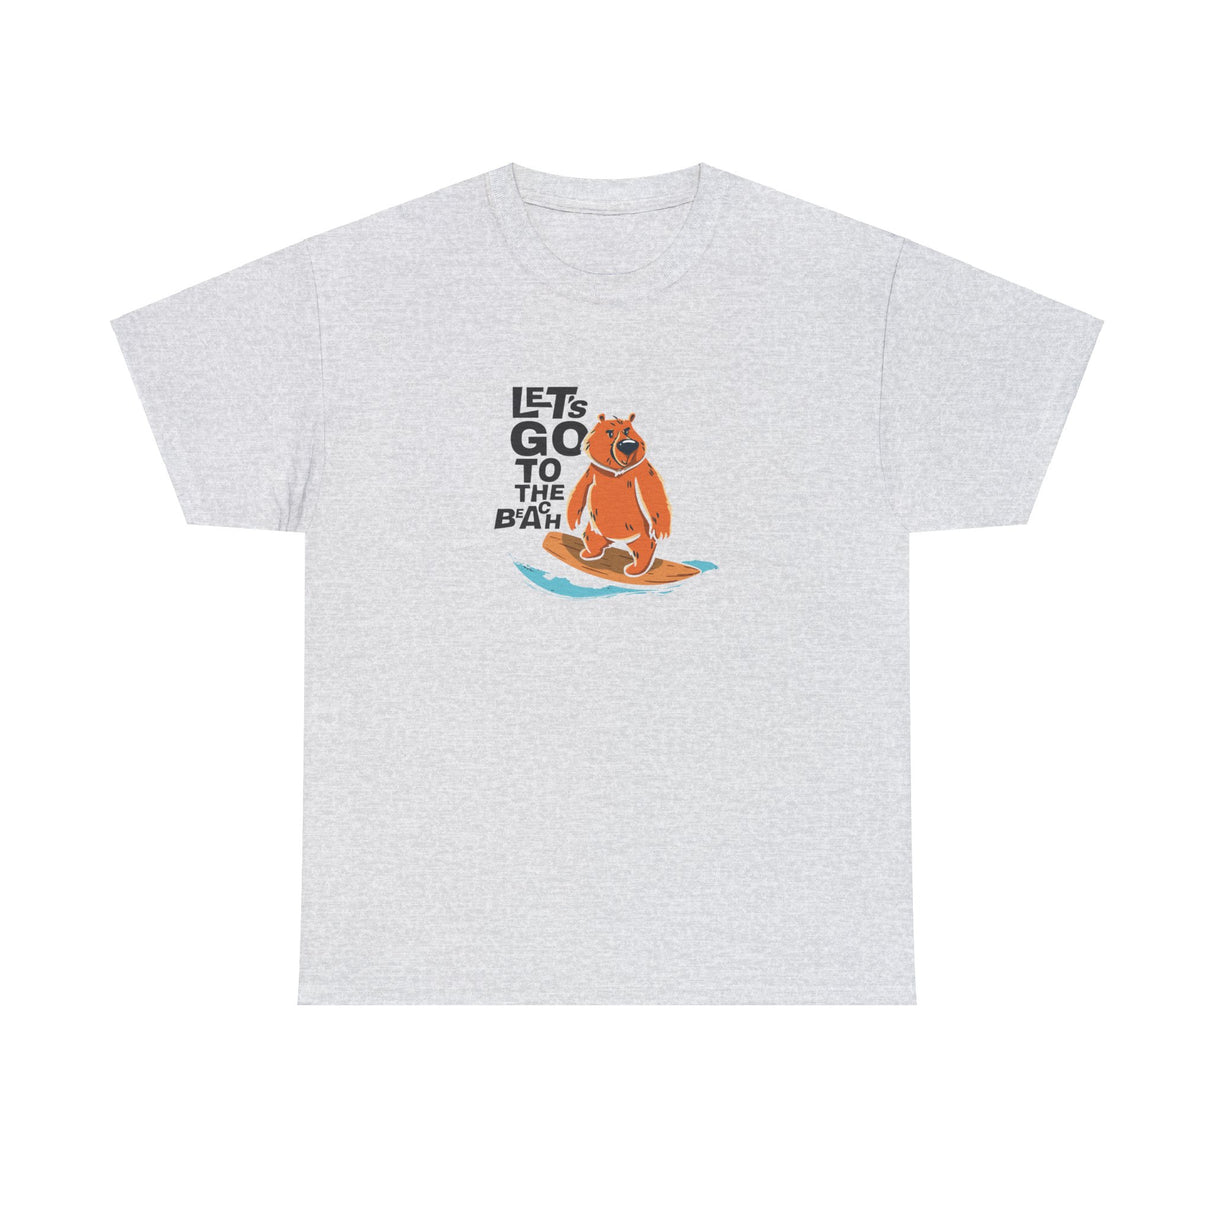 Let's Go To The Beach Bear Graphic Tee Shirt